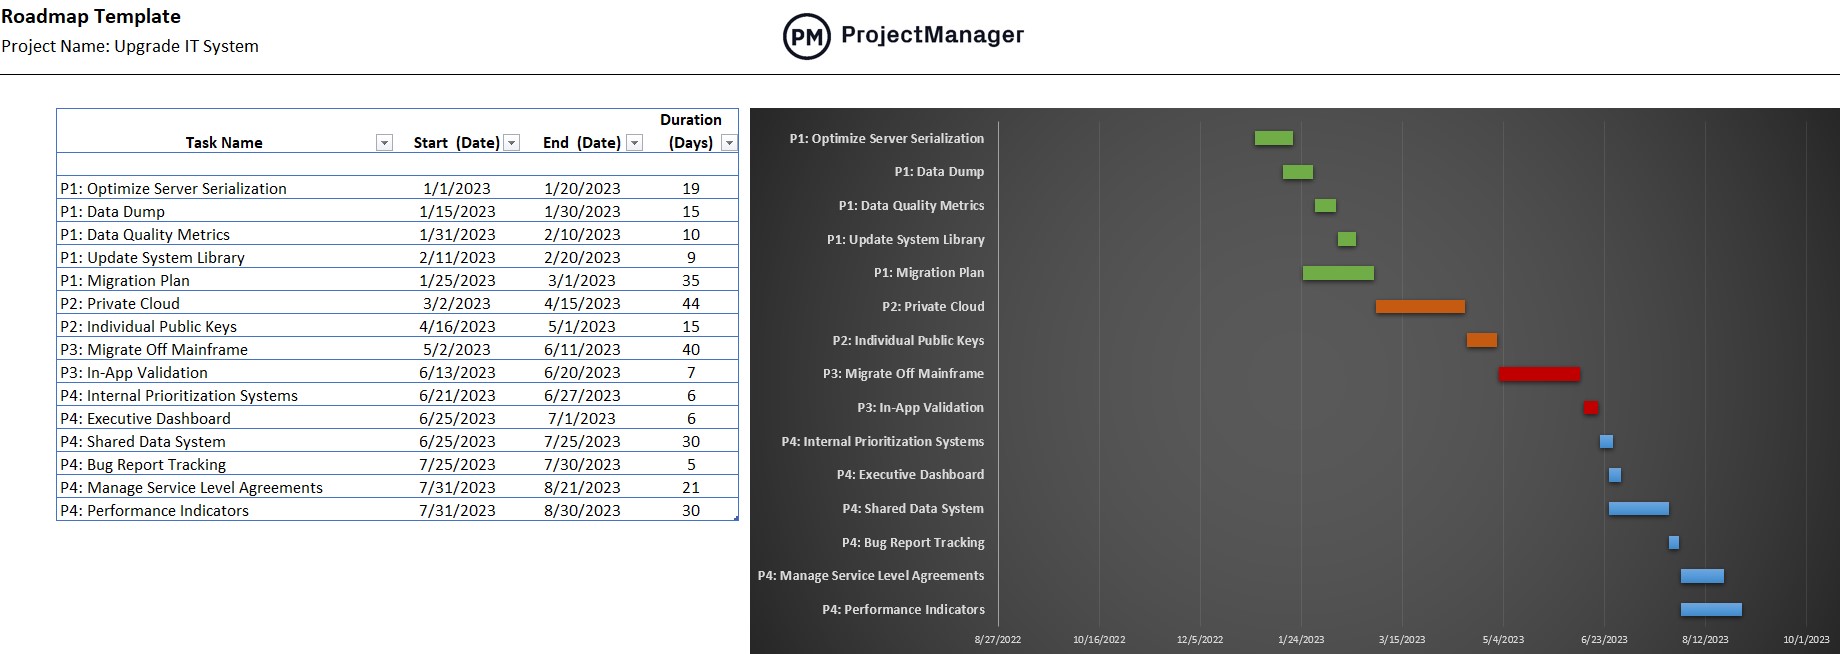 ProjectManager's strategy roadmap template